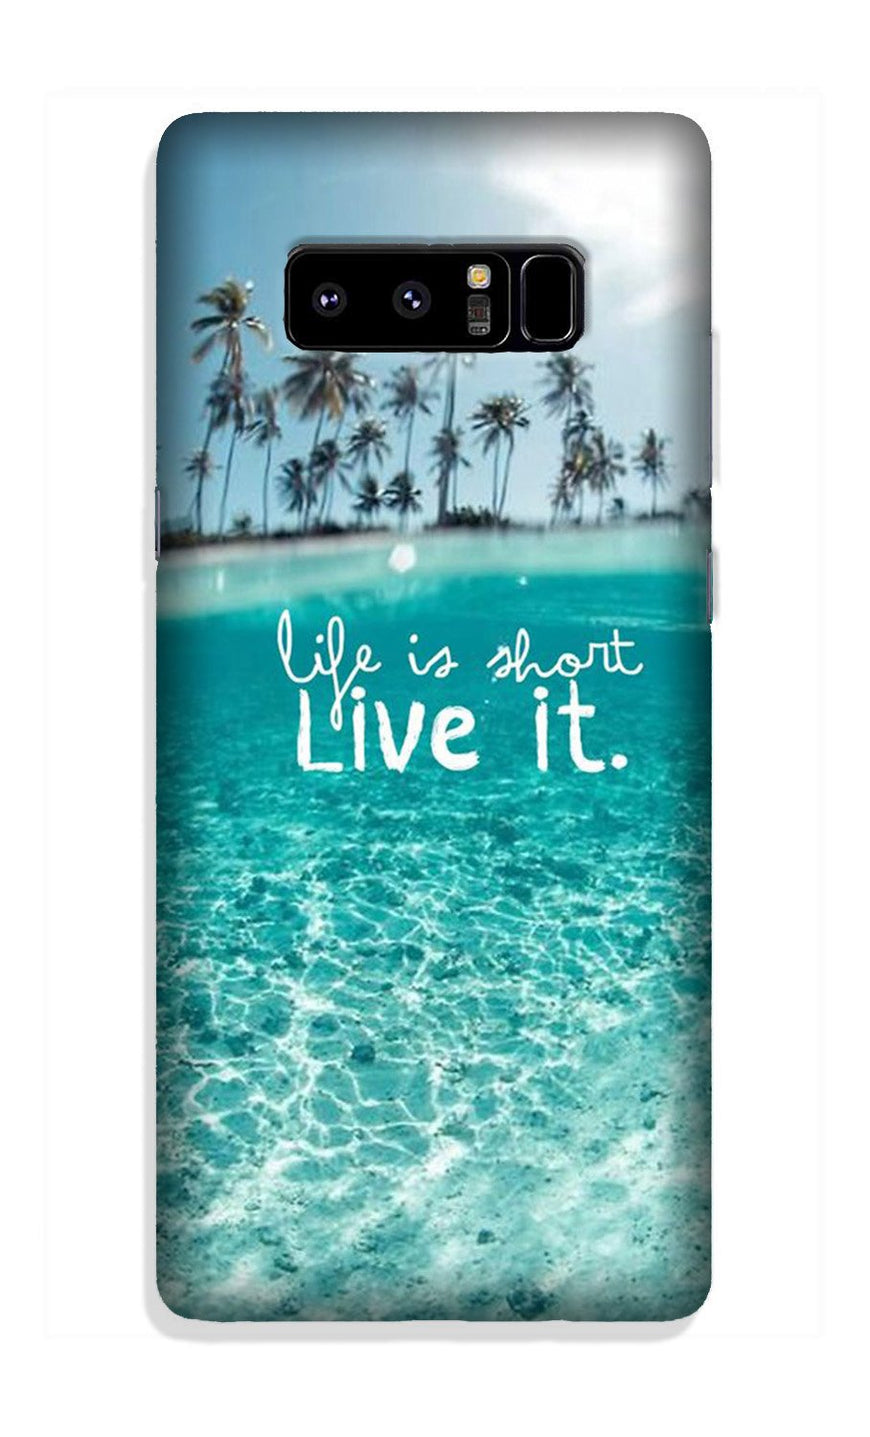 Life is short live it Case for Galaxy Note 8